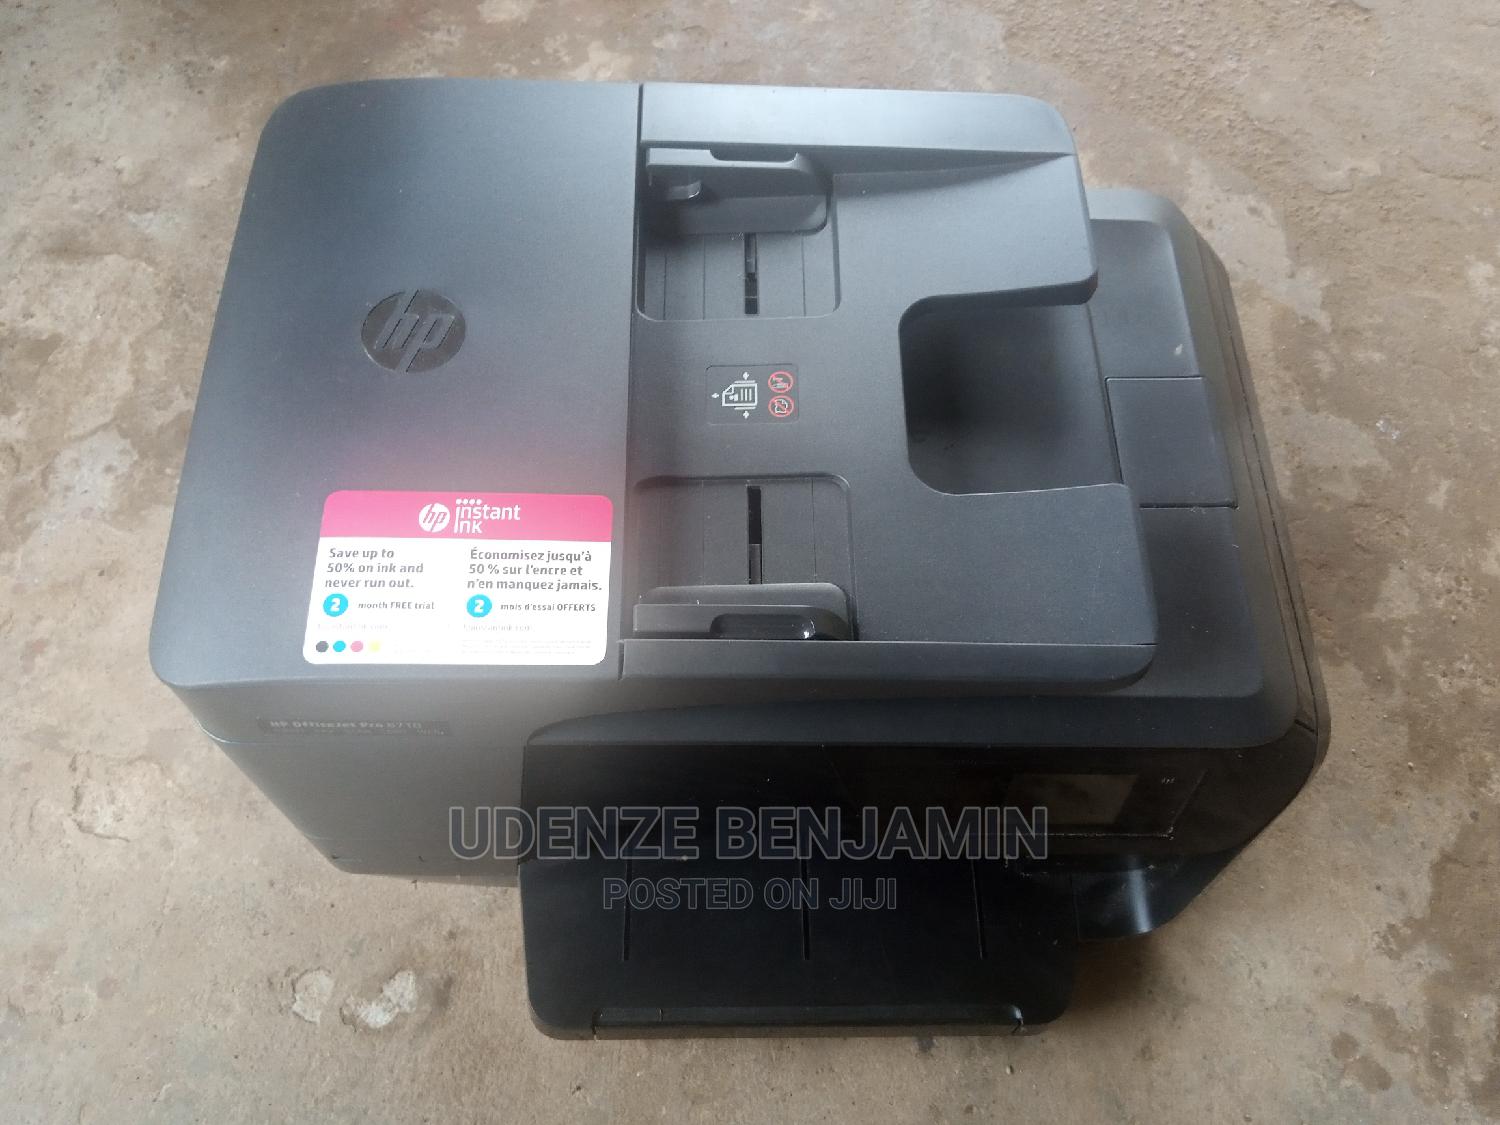 hp officejet pro 8710 all-in-one printer.